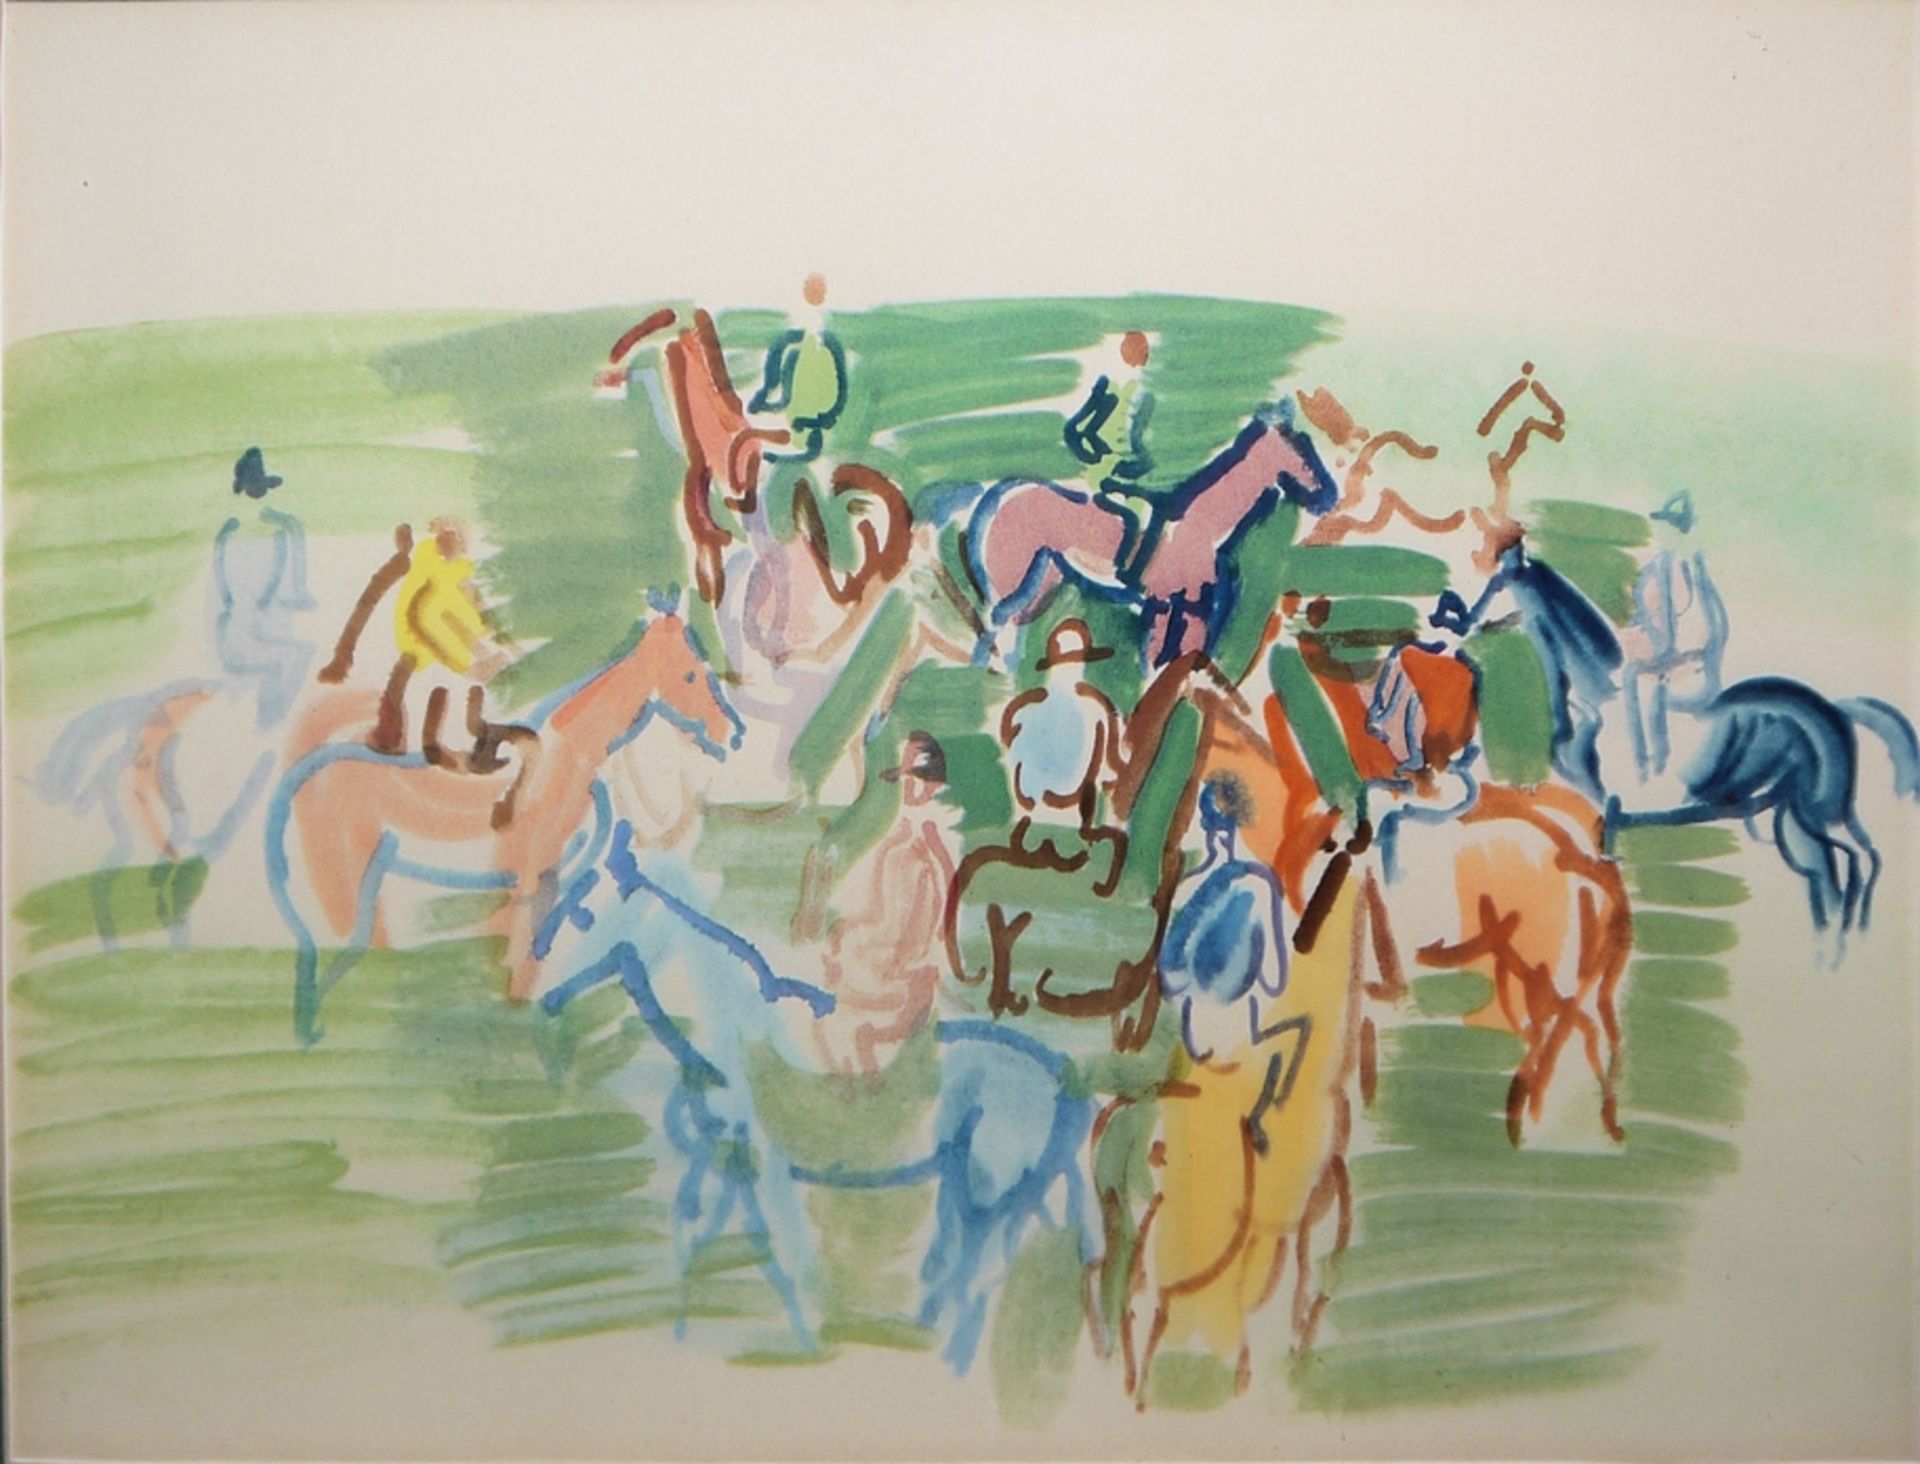 Raoul Dufy, "Paddock" (Riders in a Paddock), colour lithograph, framed - Image 2 of 2